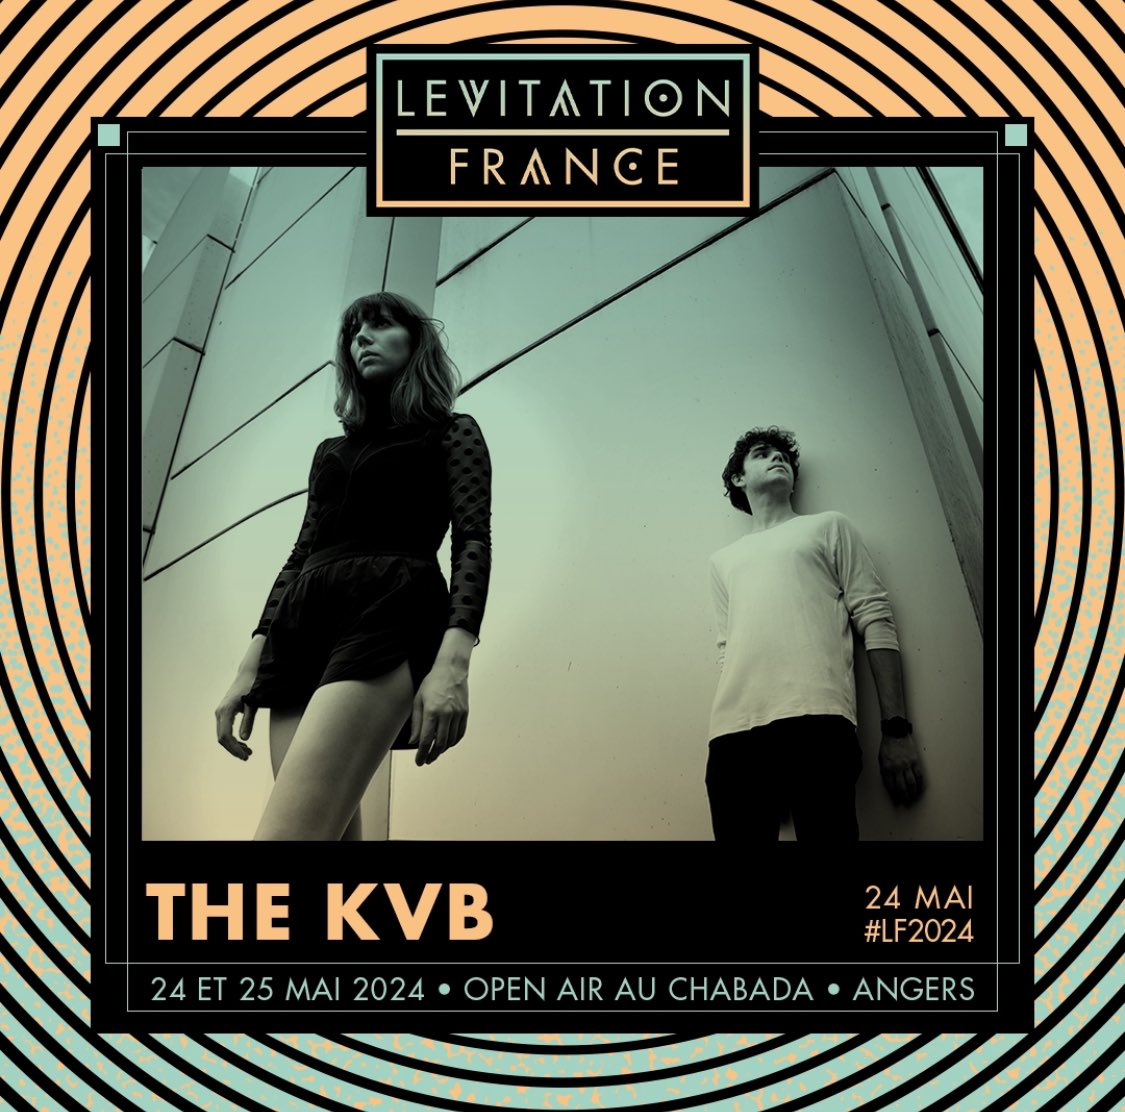 Sadly we will not be able to play Levitation in Angers on May 24th because Geoffs broken ankle will still not be mended in time to play. But we’re happy to hear that our label mates @TheKVB will be replacing us at the festival, you’re lucky people! We’re very sorry, Beak> x